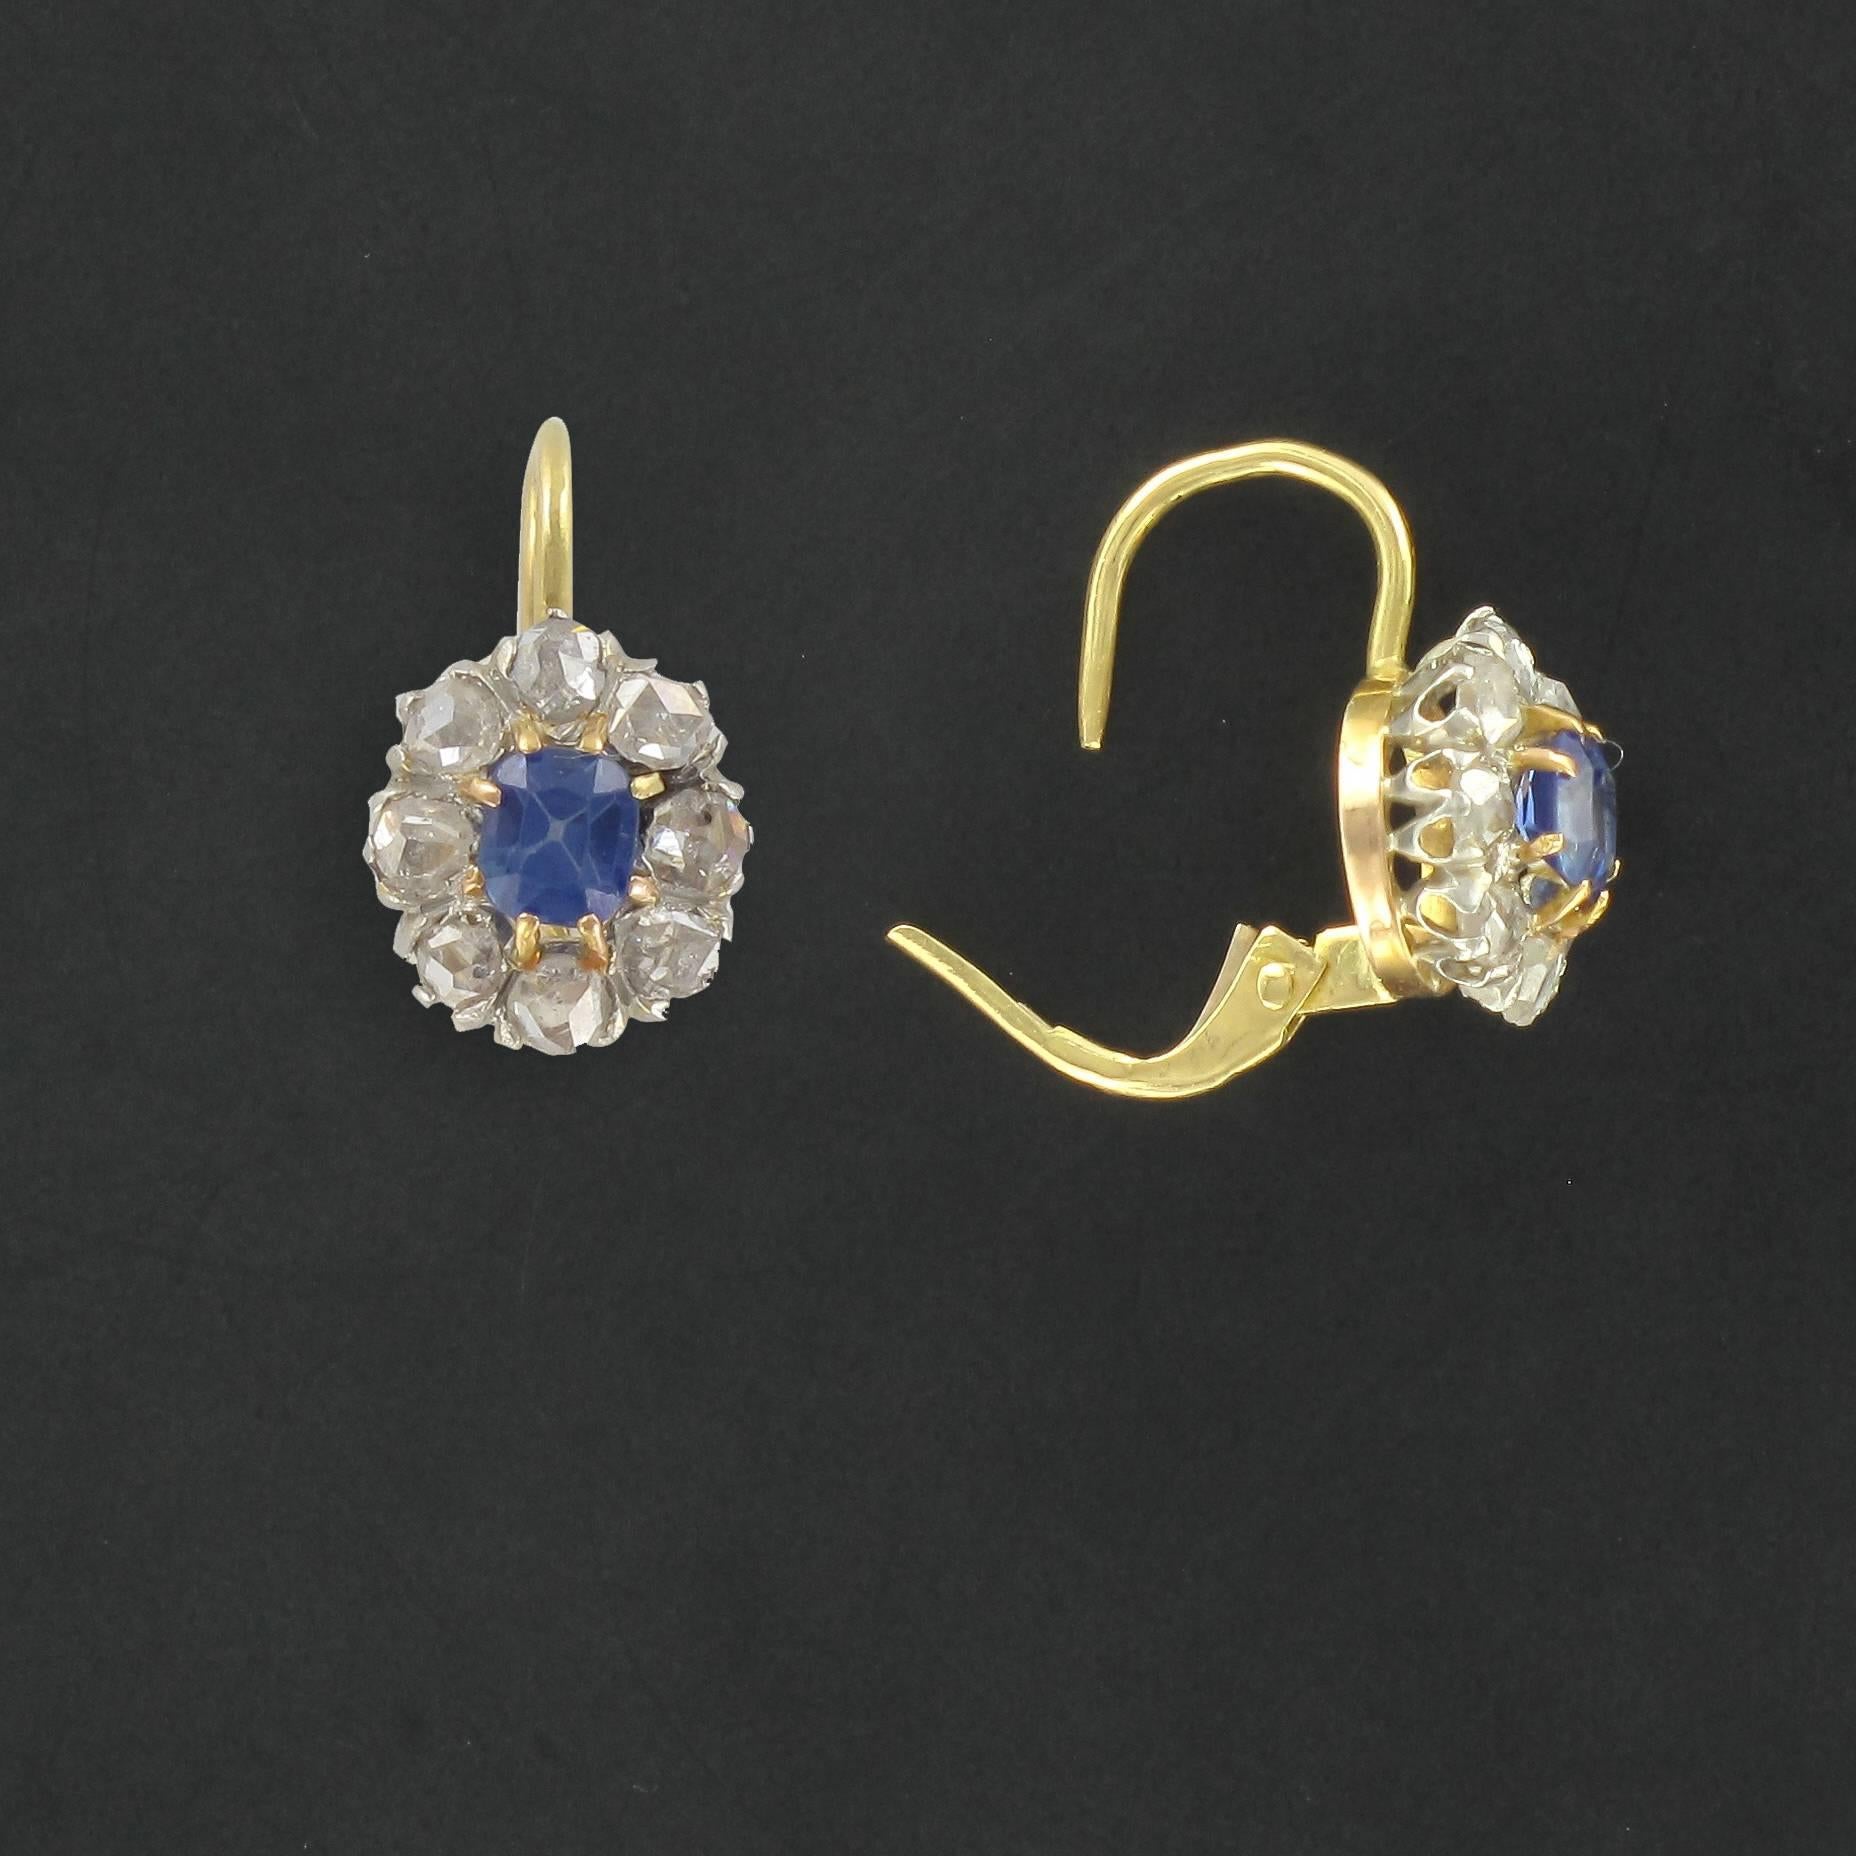 Earrings in 18 carat yellow gold. 

Each Daisy style sleeper earring is claw set with a cushion cut sapphire surrounded by antique cut diamonds. The snap clasp is at the back. 

Overall height: 1.6 cm, Width at widest: 9 mm, Thickness at widest: